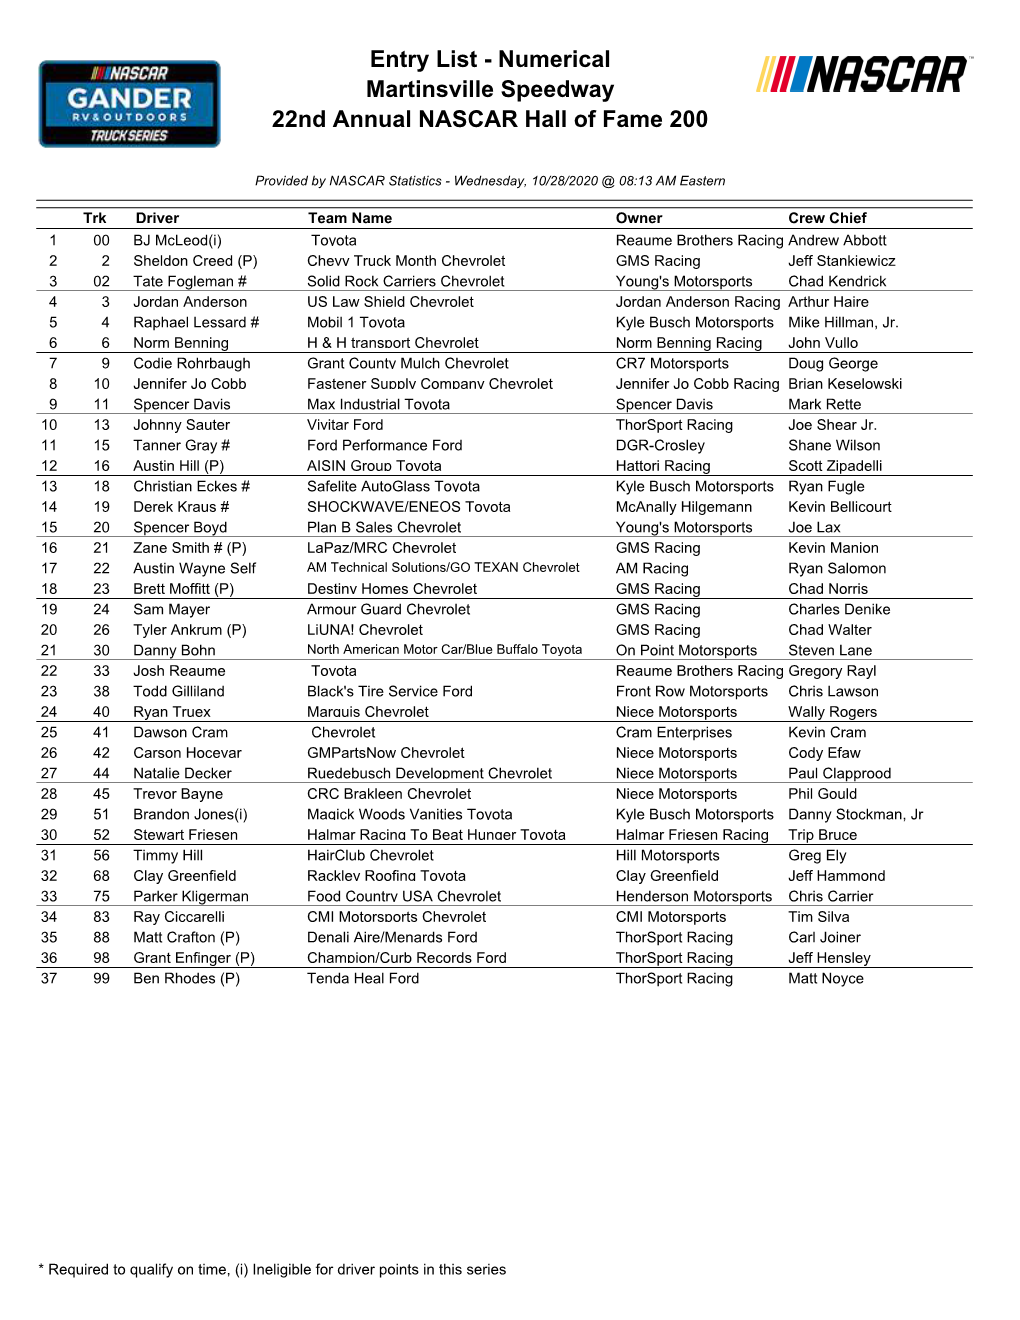 Entry List - Numerical Martinsville Speedway 22Nd Annual NASCAR Hall of Fame 200